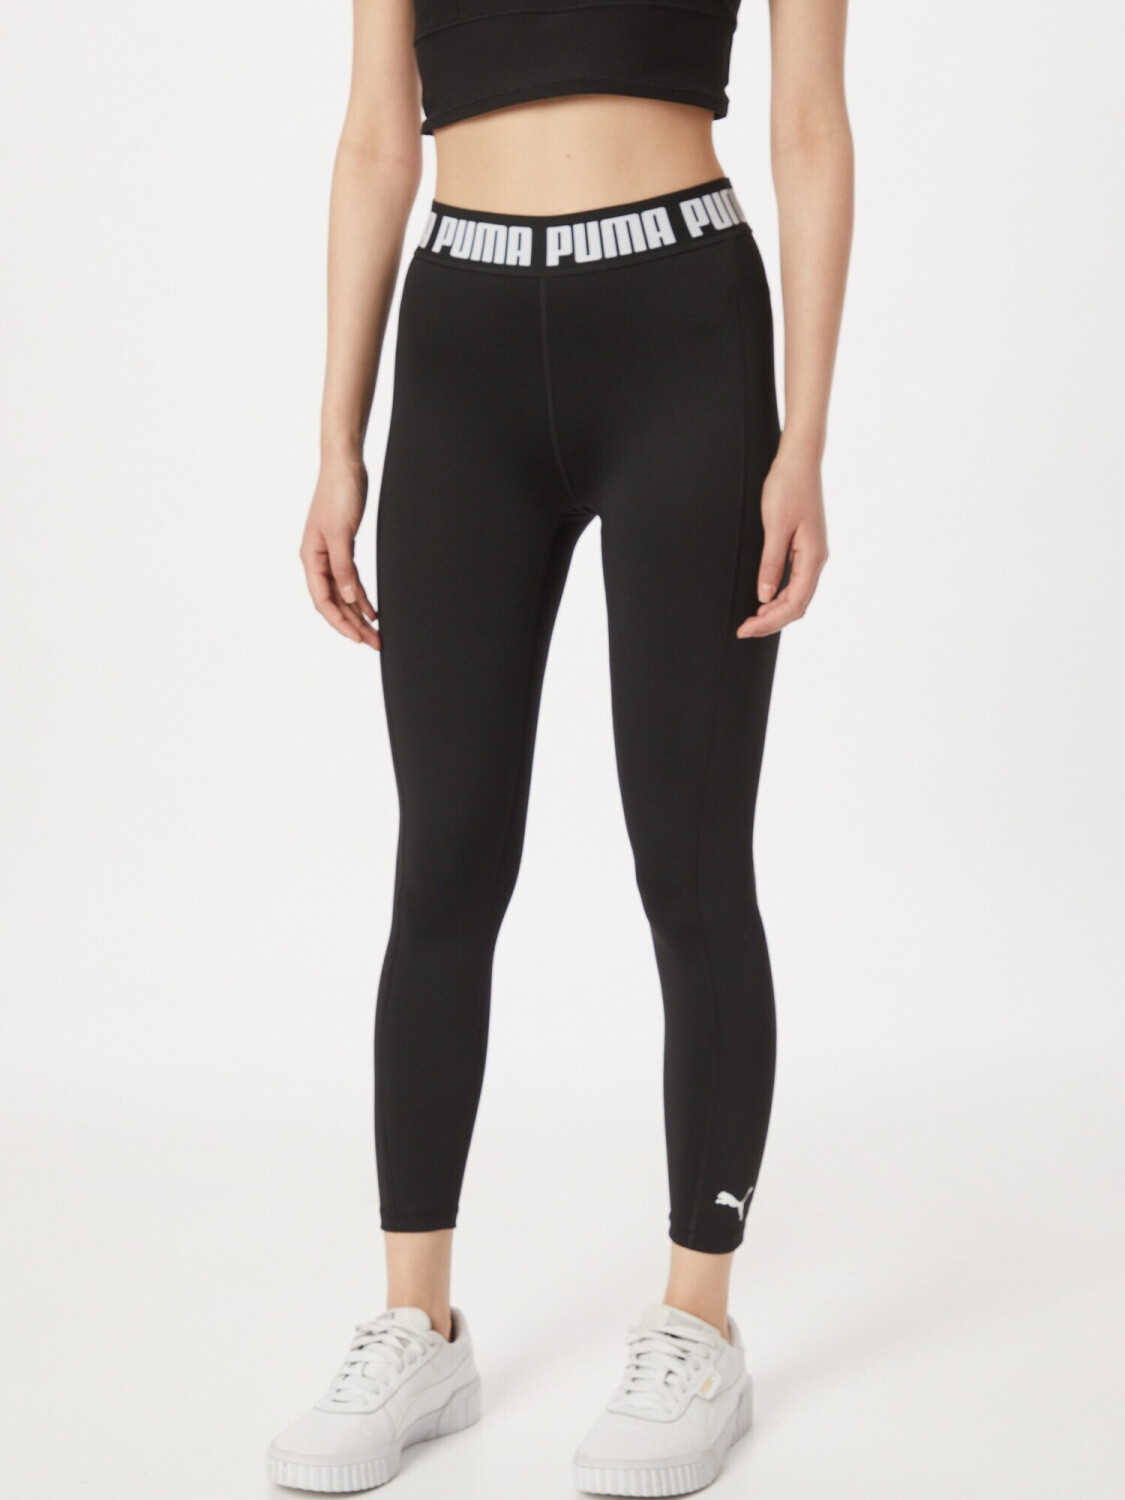 Buy Puma Leggings Full Waist black from Deals Best on puma Strong – High (521601) £12.00 (Today)